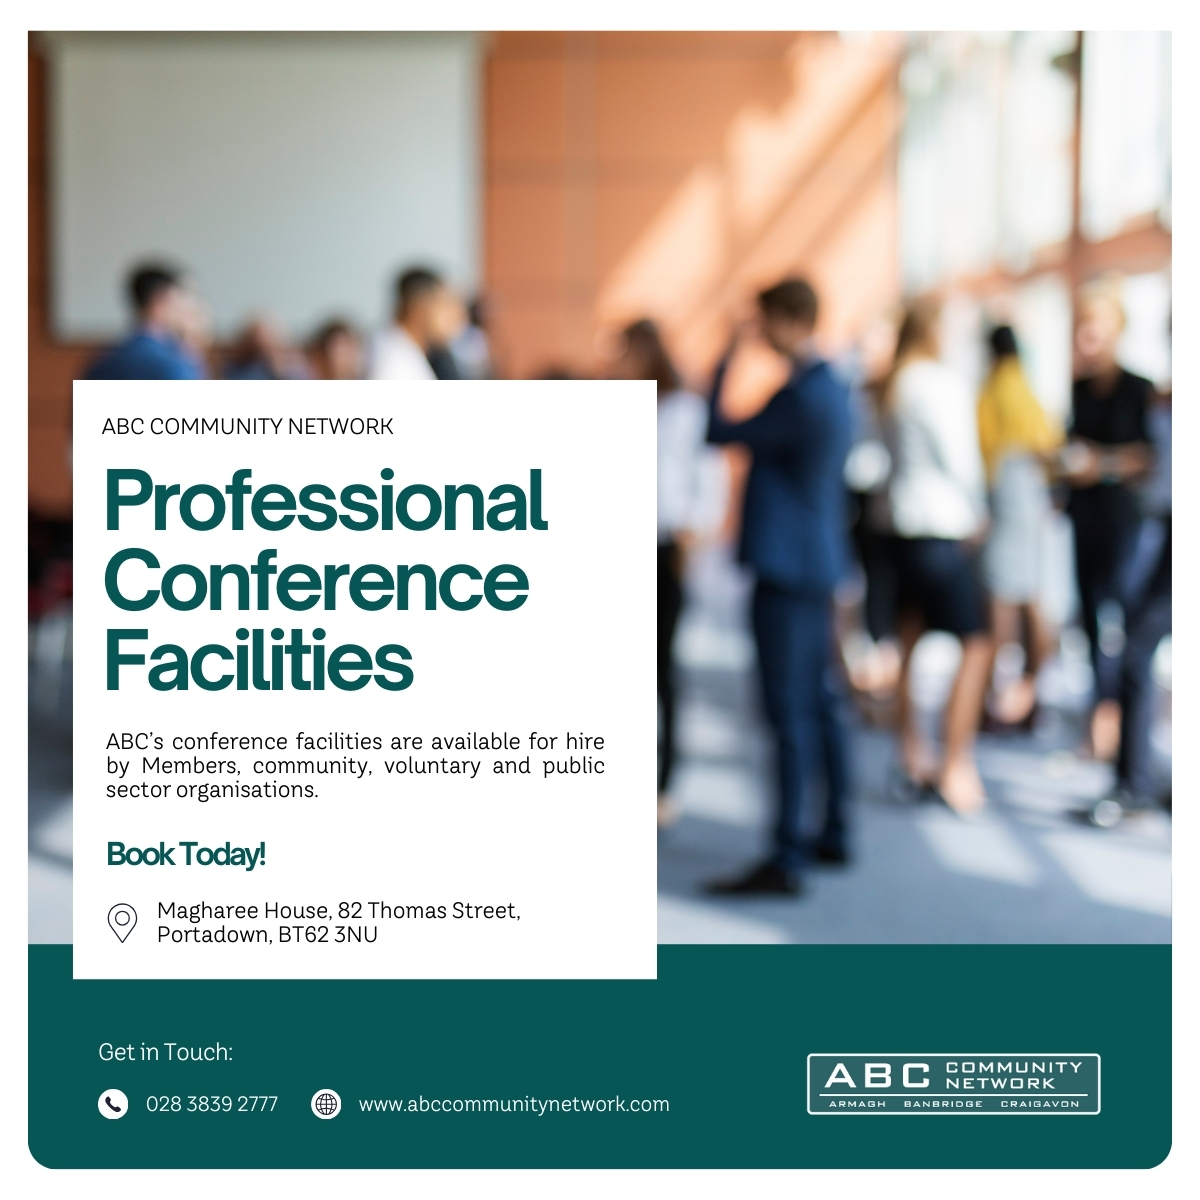 Professional Conference Facilities 🏢✨

Our conference facilities are available for hire by members, community, voluntary and public sector organisations.

Learn More: abccommunitynetwork.com/conference-fac…

#ConferenceFacilities #EventSpace #CollaborationHub #Community #Portadown